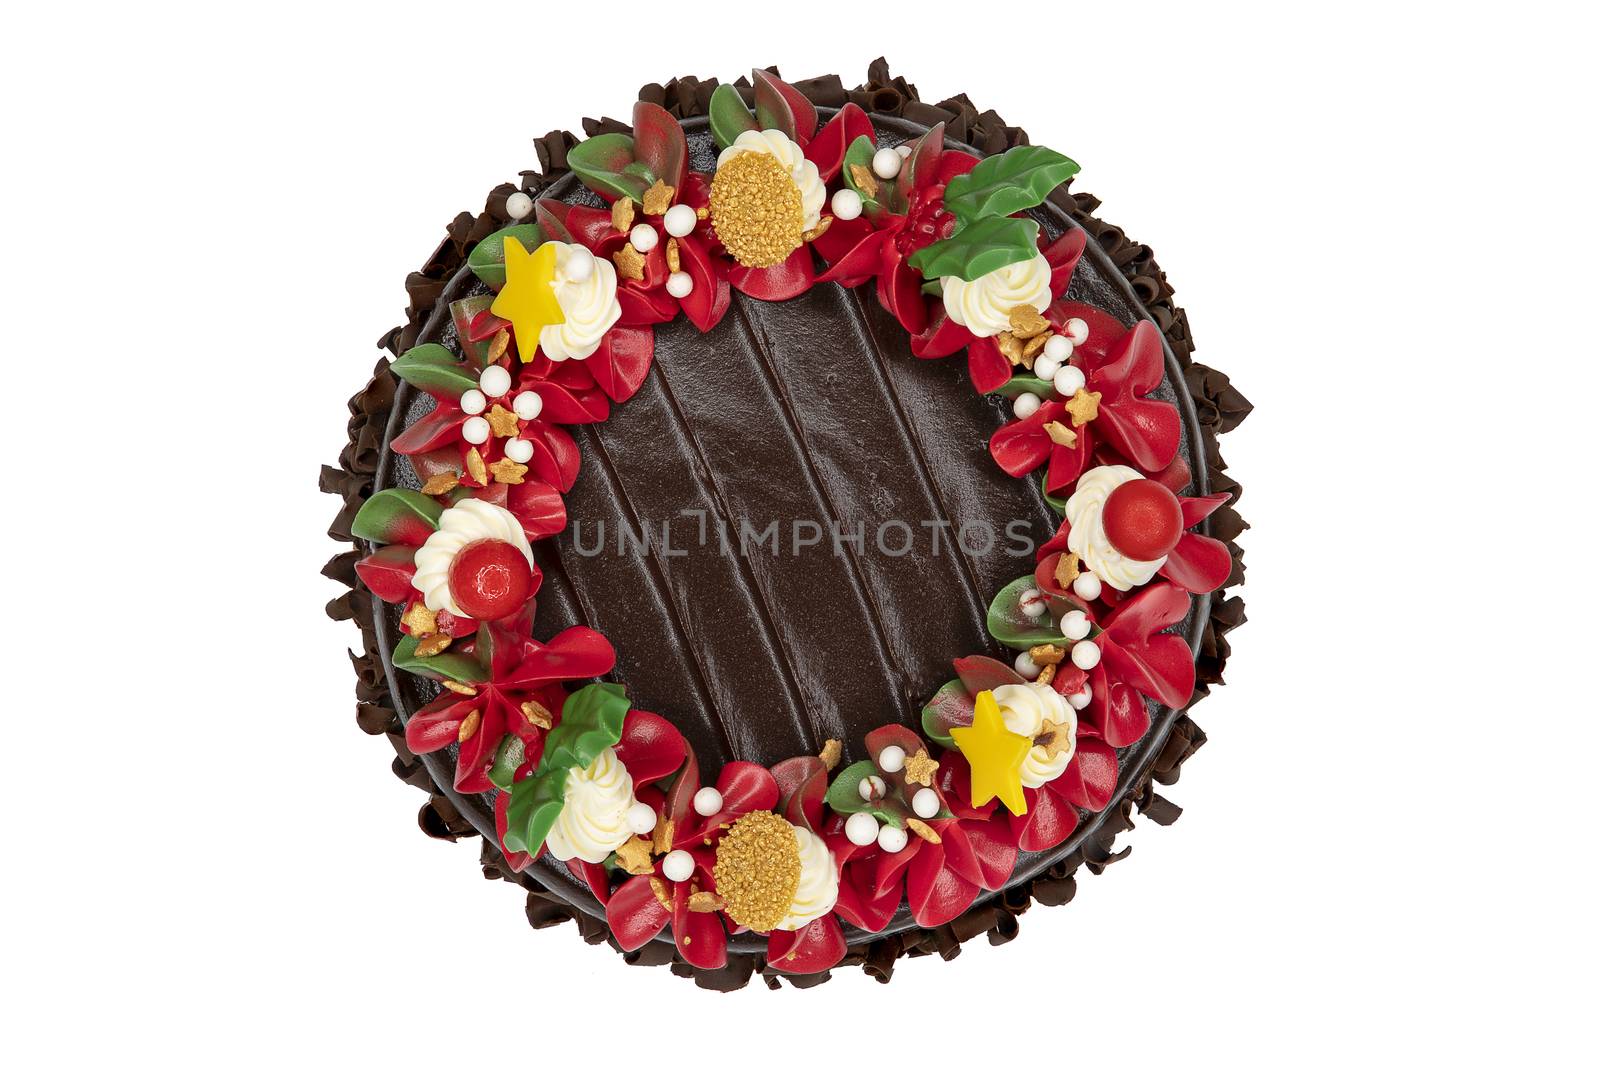 A chocolate cake decorated with red, white and green flowers and leaves, appropriate for Christmas and New Year celebration. Top view, closed up, isolated on white background with copy space.